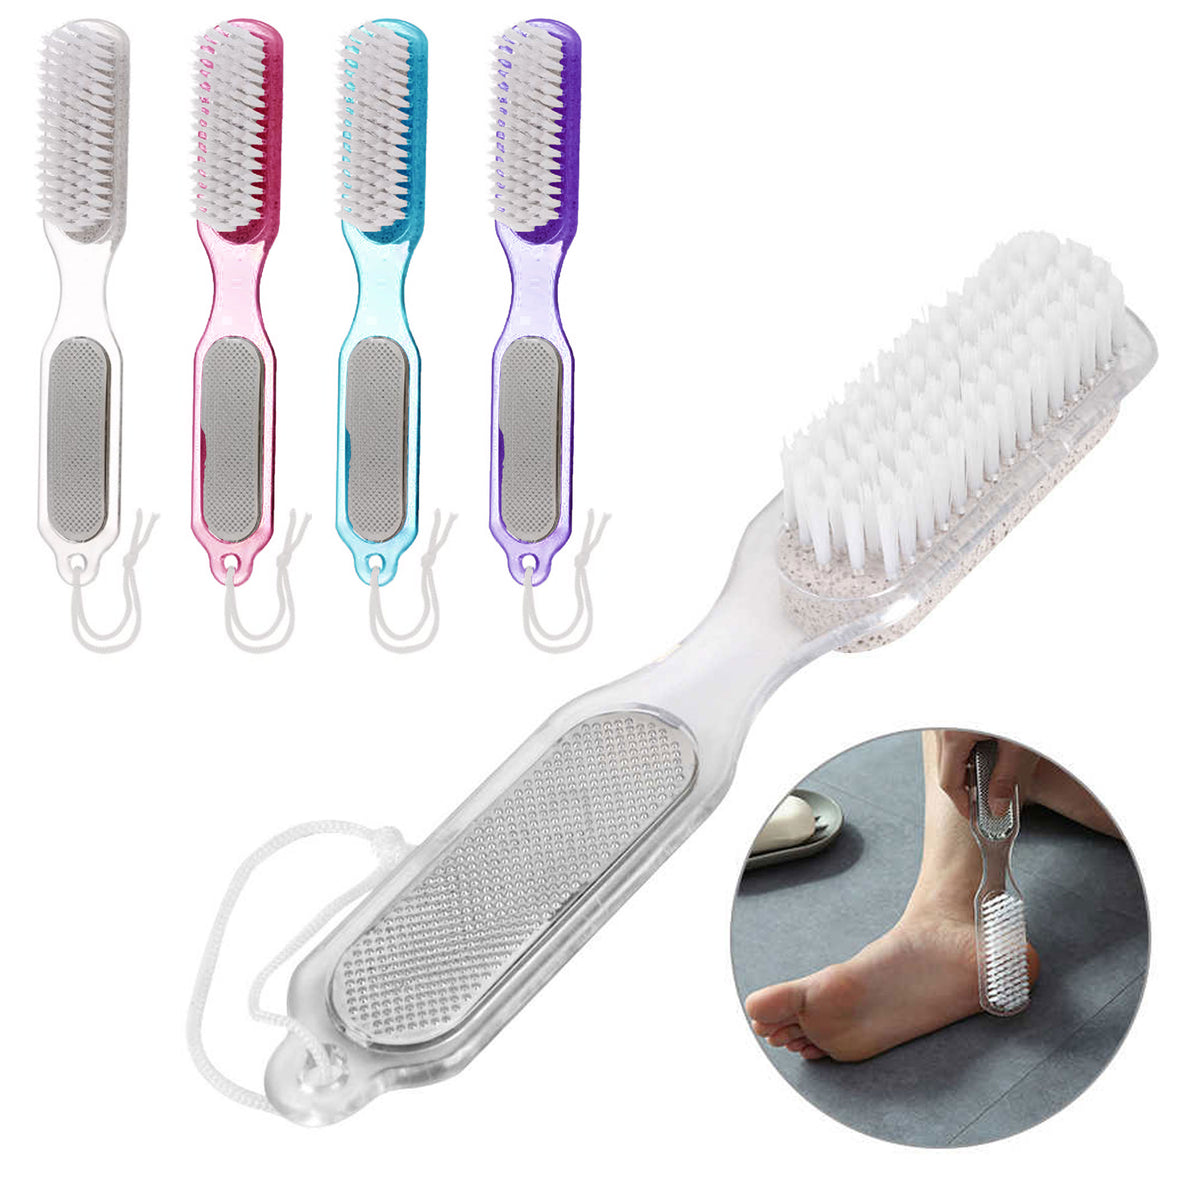 Pumice Valley  Foot Rasp Callus Remover - Pedicure Scrubber for Cracked  Feet Coarse Grained